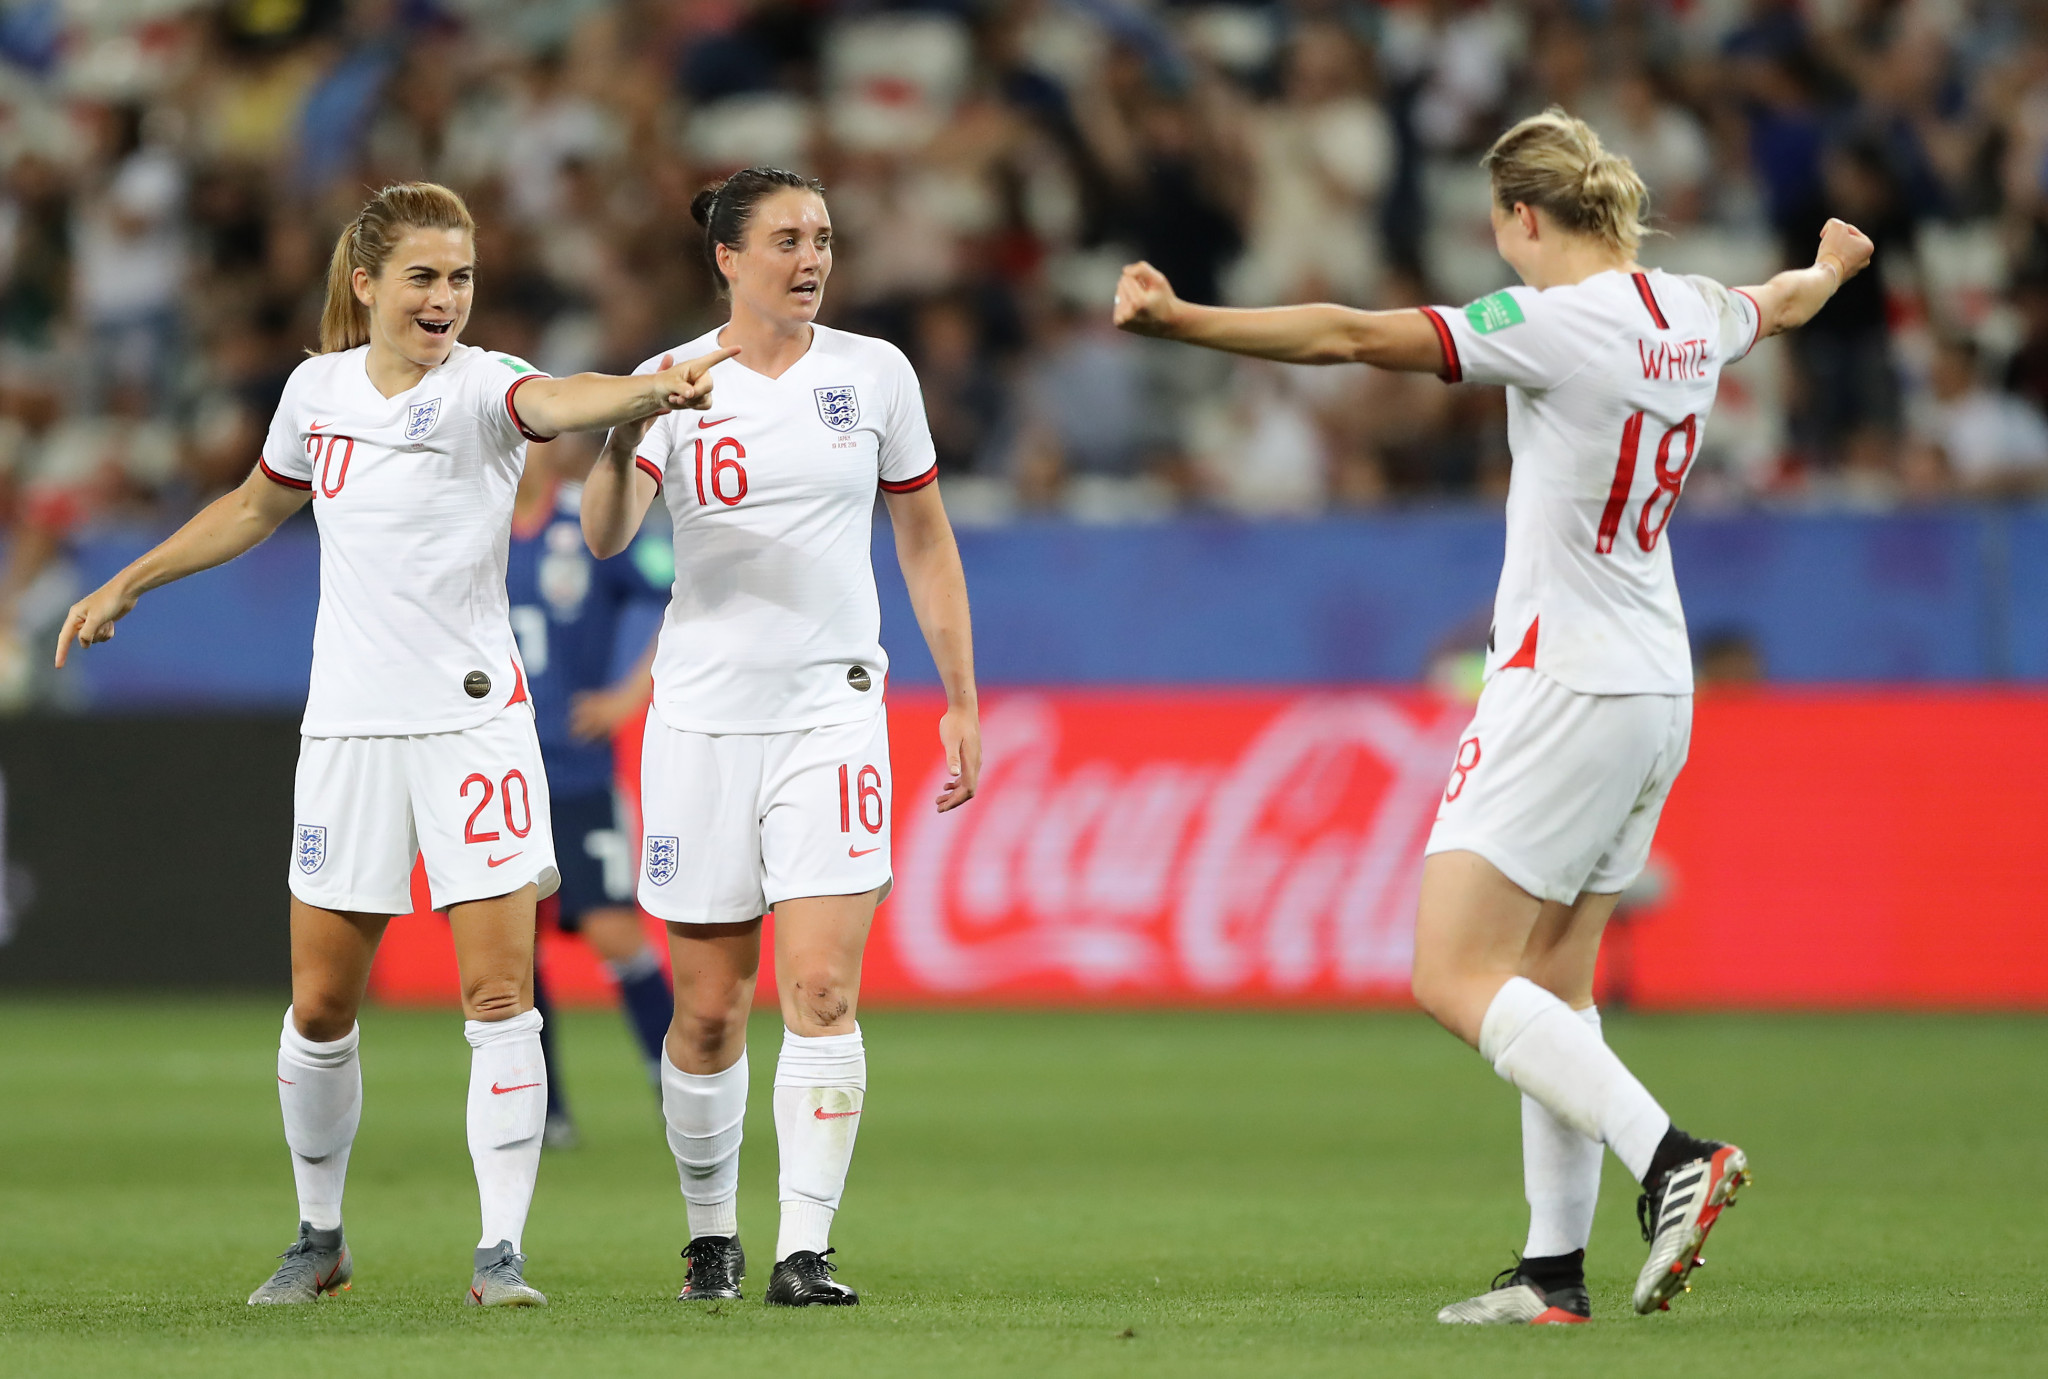 Her second goal secured a 2-0 victory for England ©Getty Images